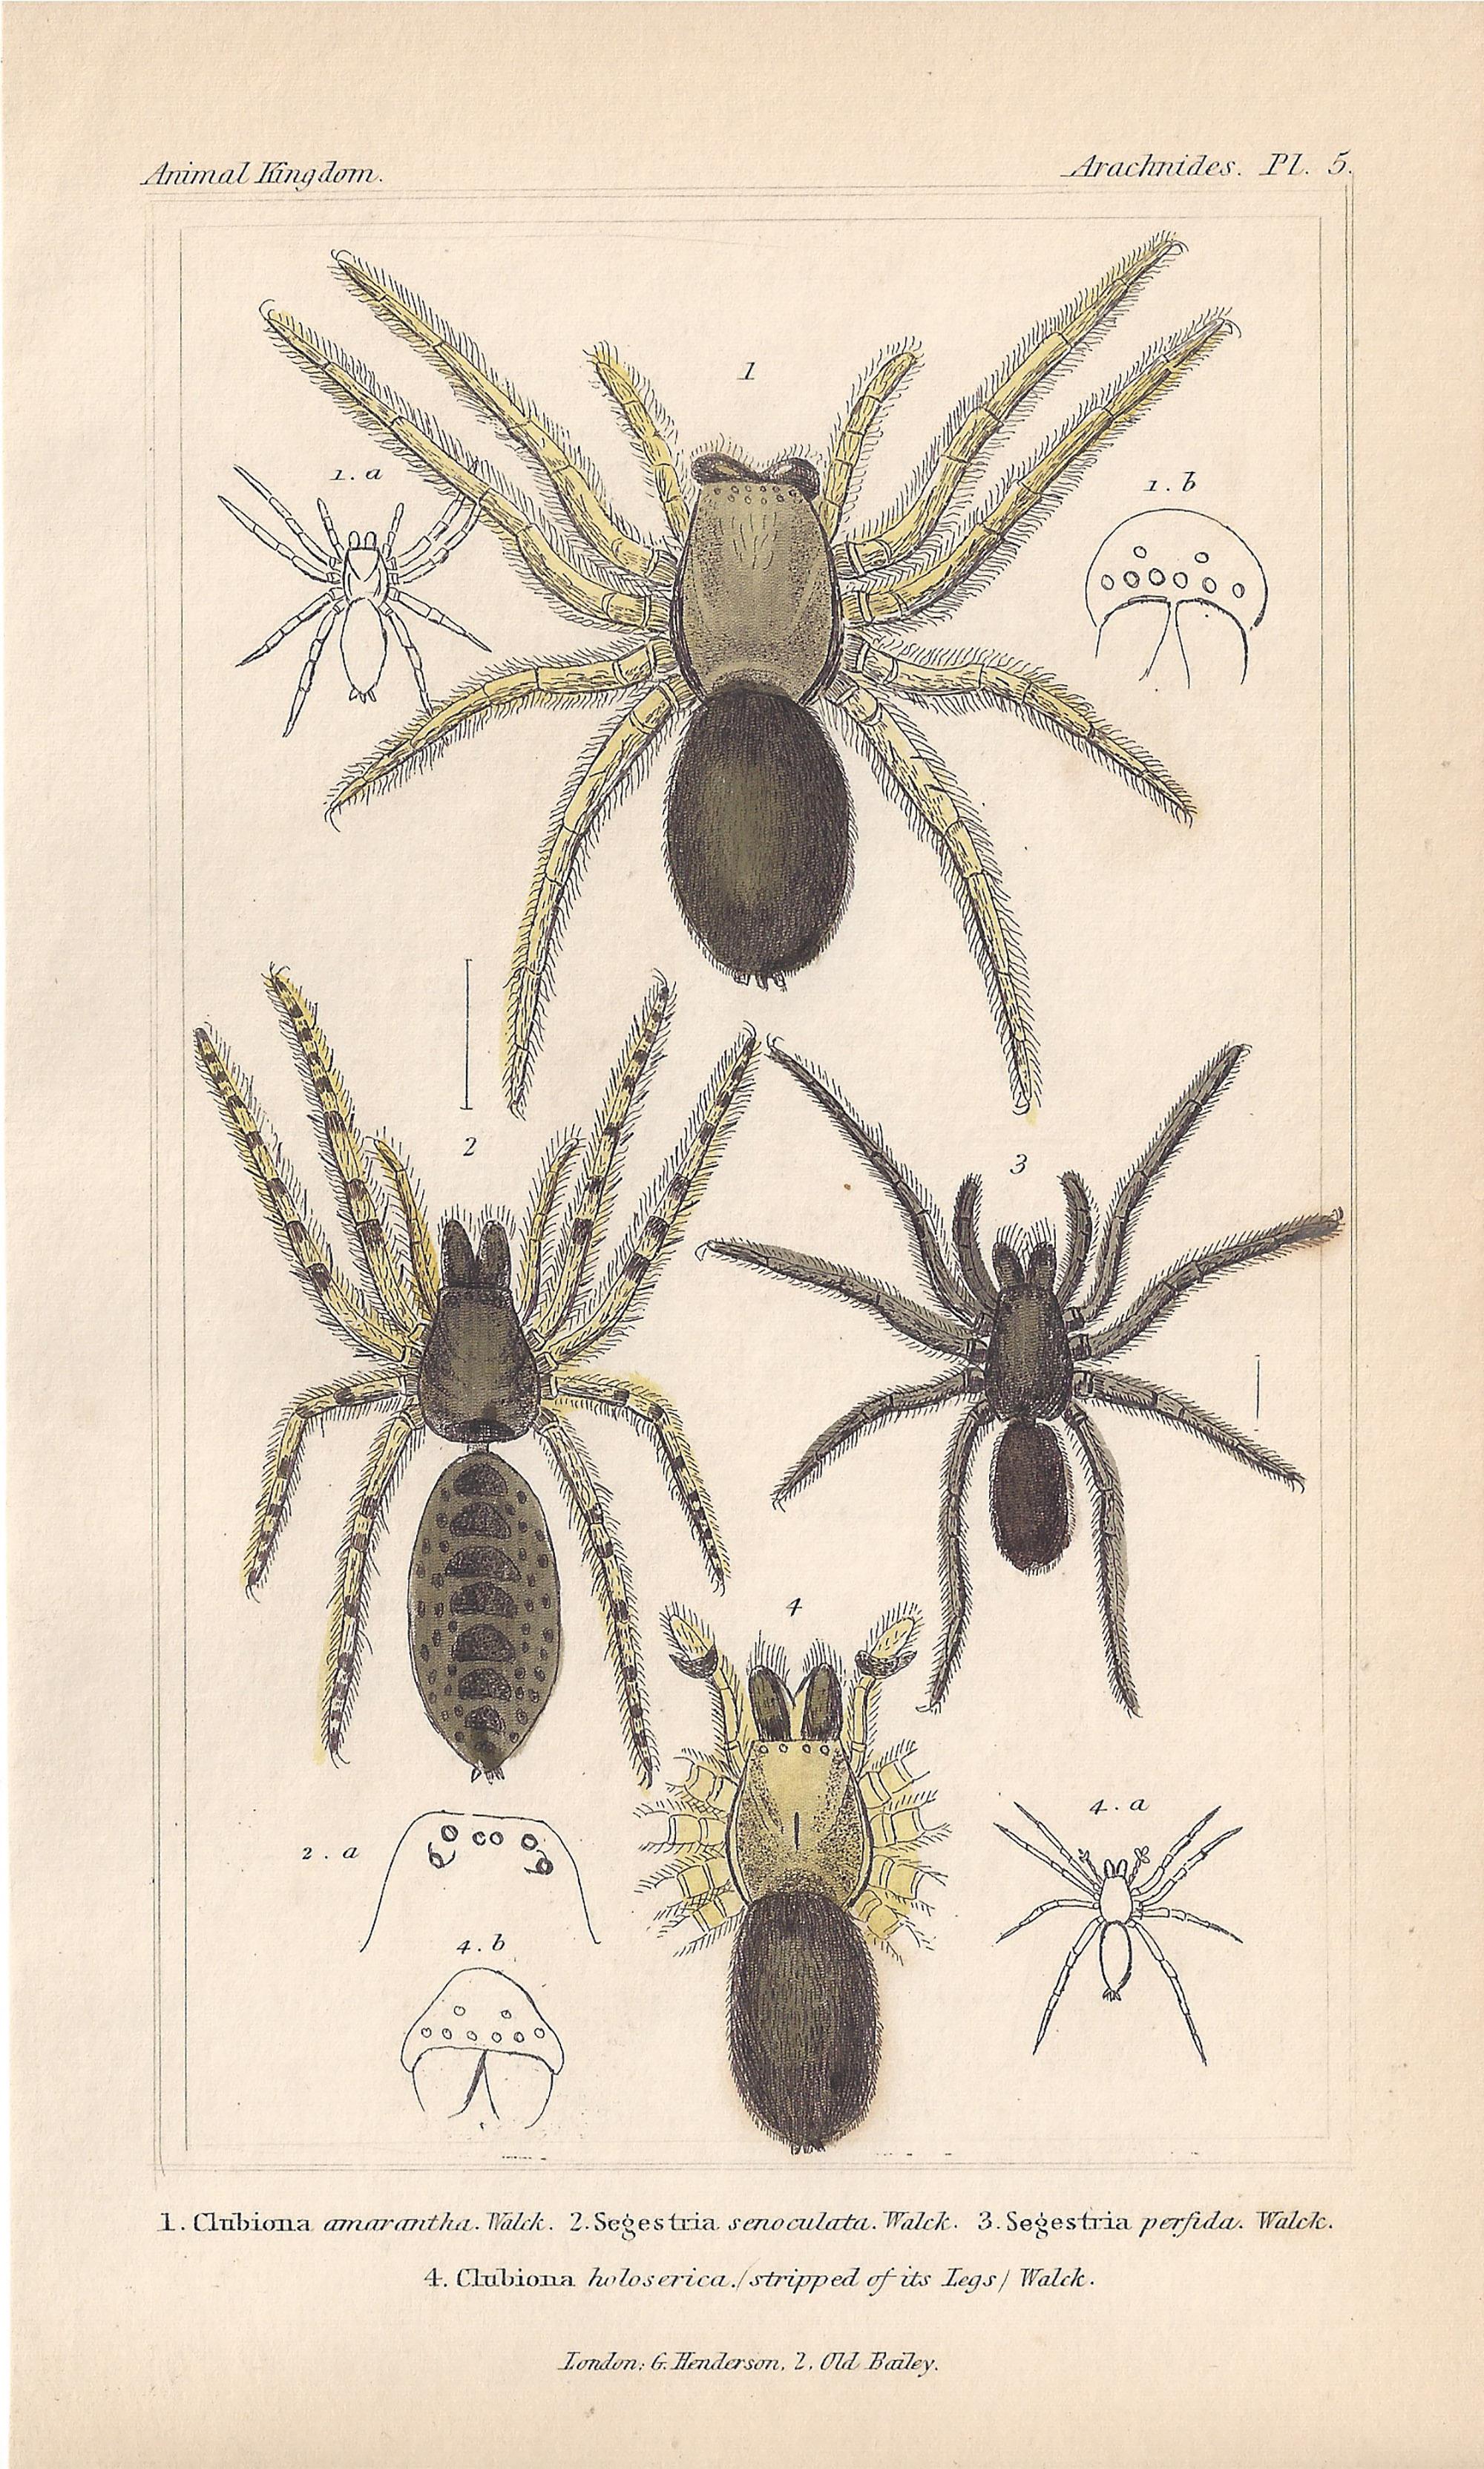 Unknown Animal Print - Spiders, antique English natural history engraving prints, 1837